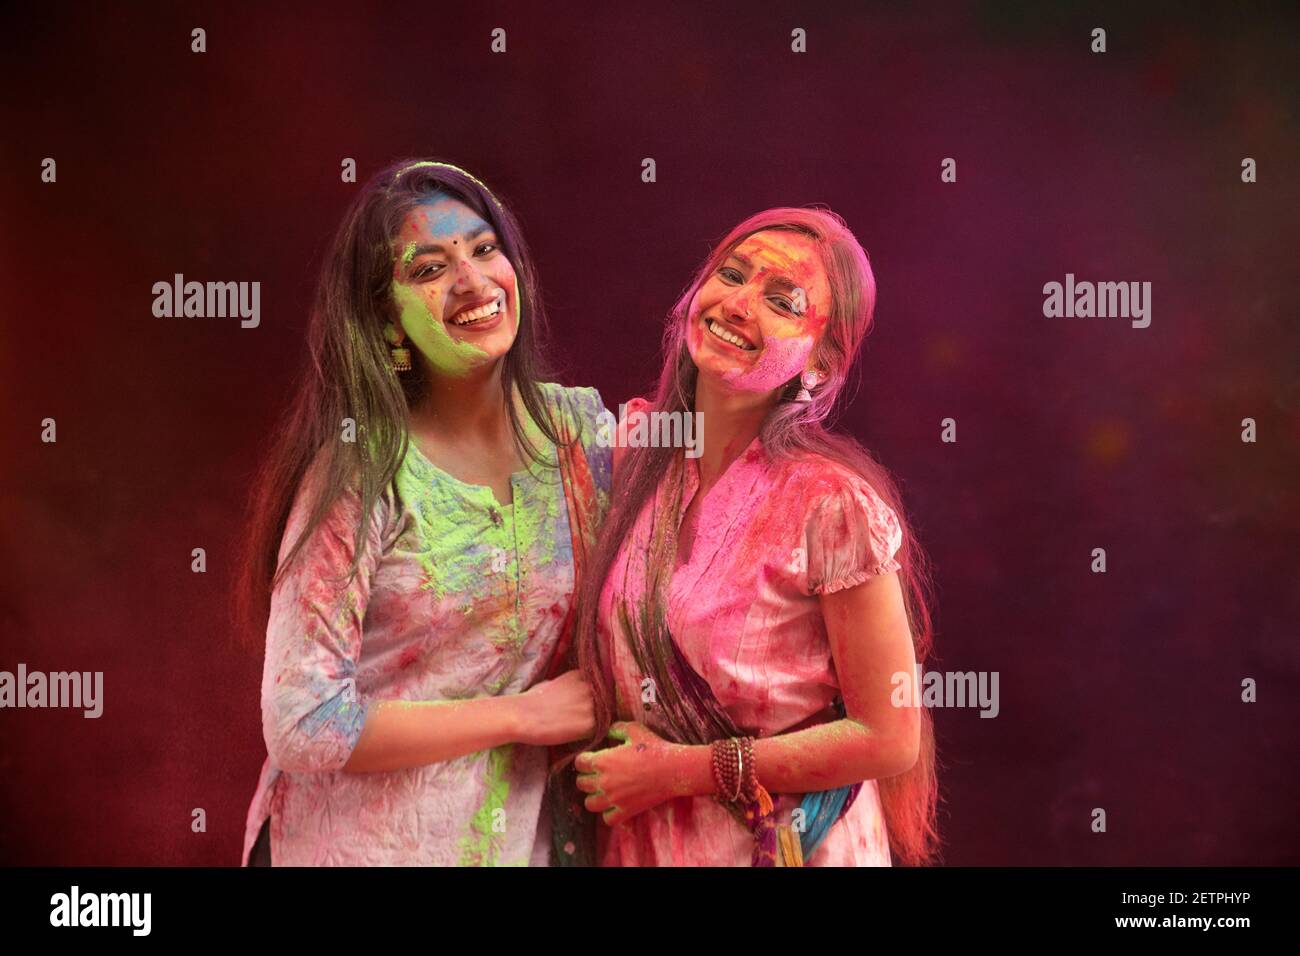 TWO YOUNG WOMEN HAPPILY POSING TOGETHER WHILE CELEBRATING HOLI Stock Photo